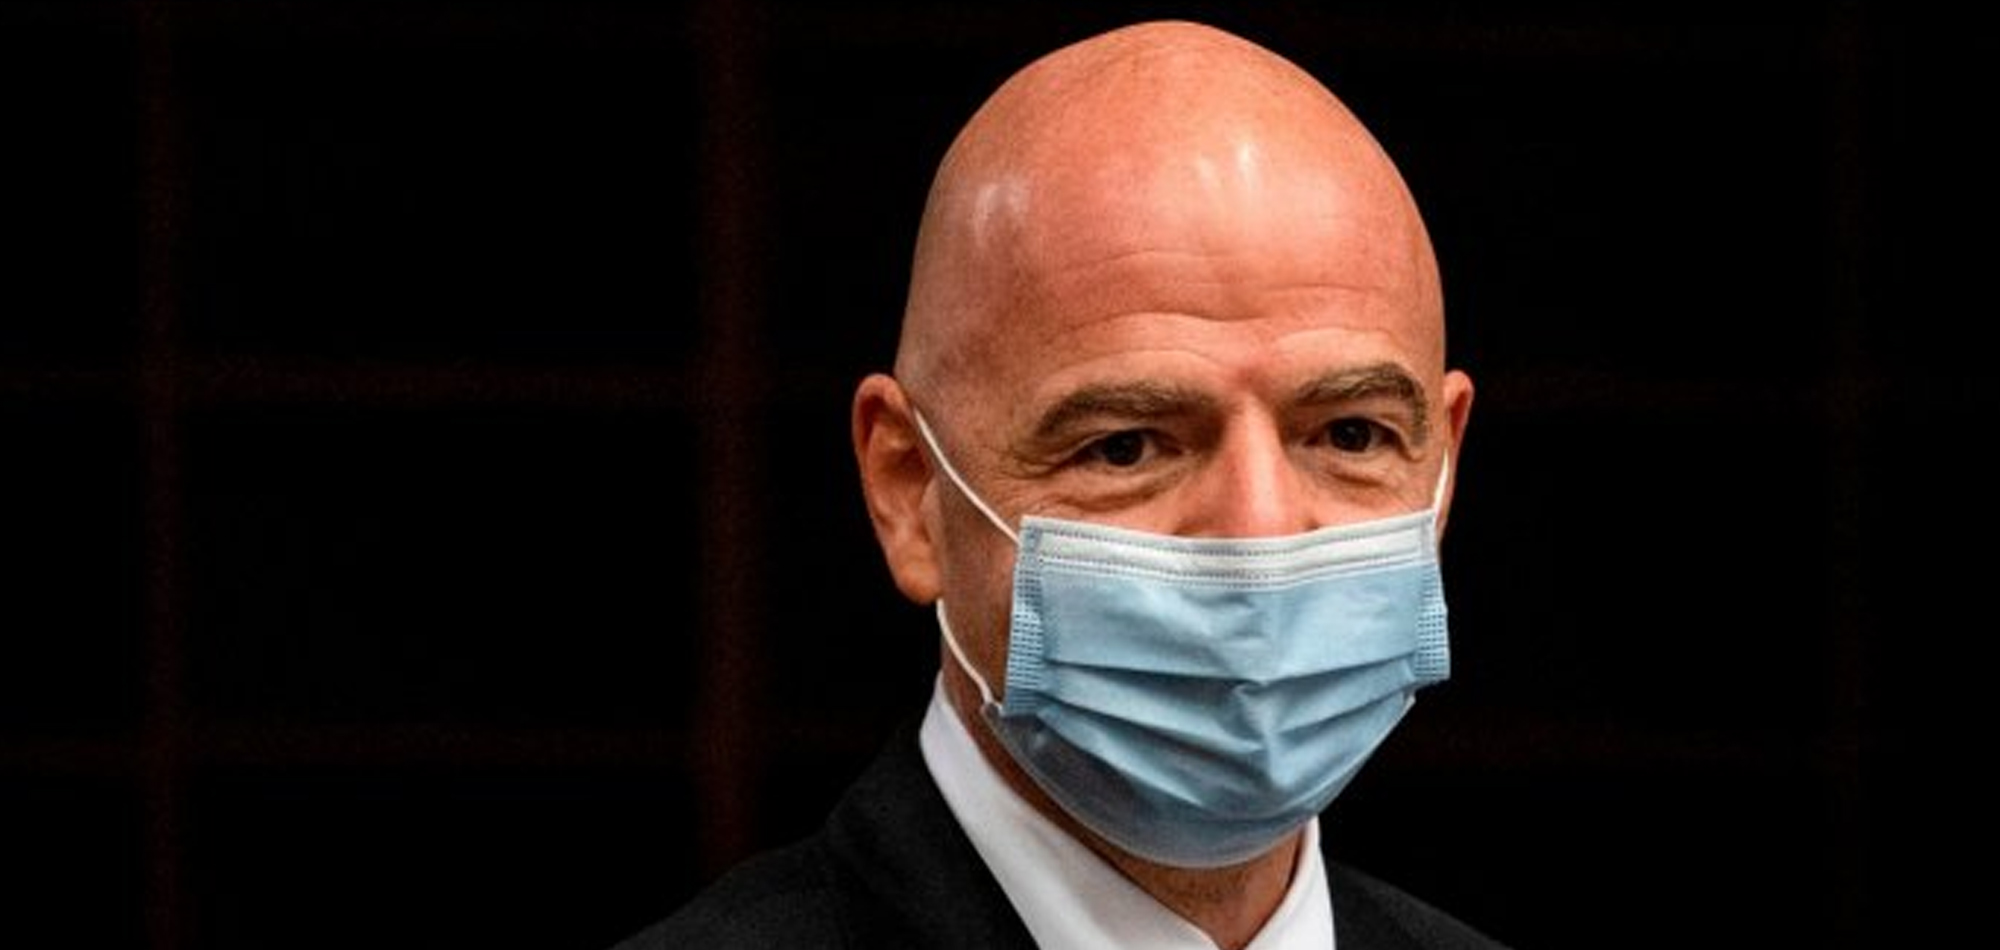 FIFA president Gianni Infantino tests positive for coronavirus and has entered isolation after showing 